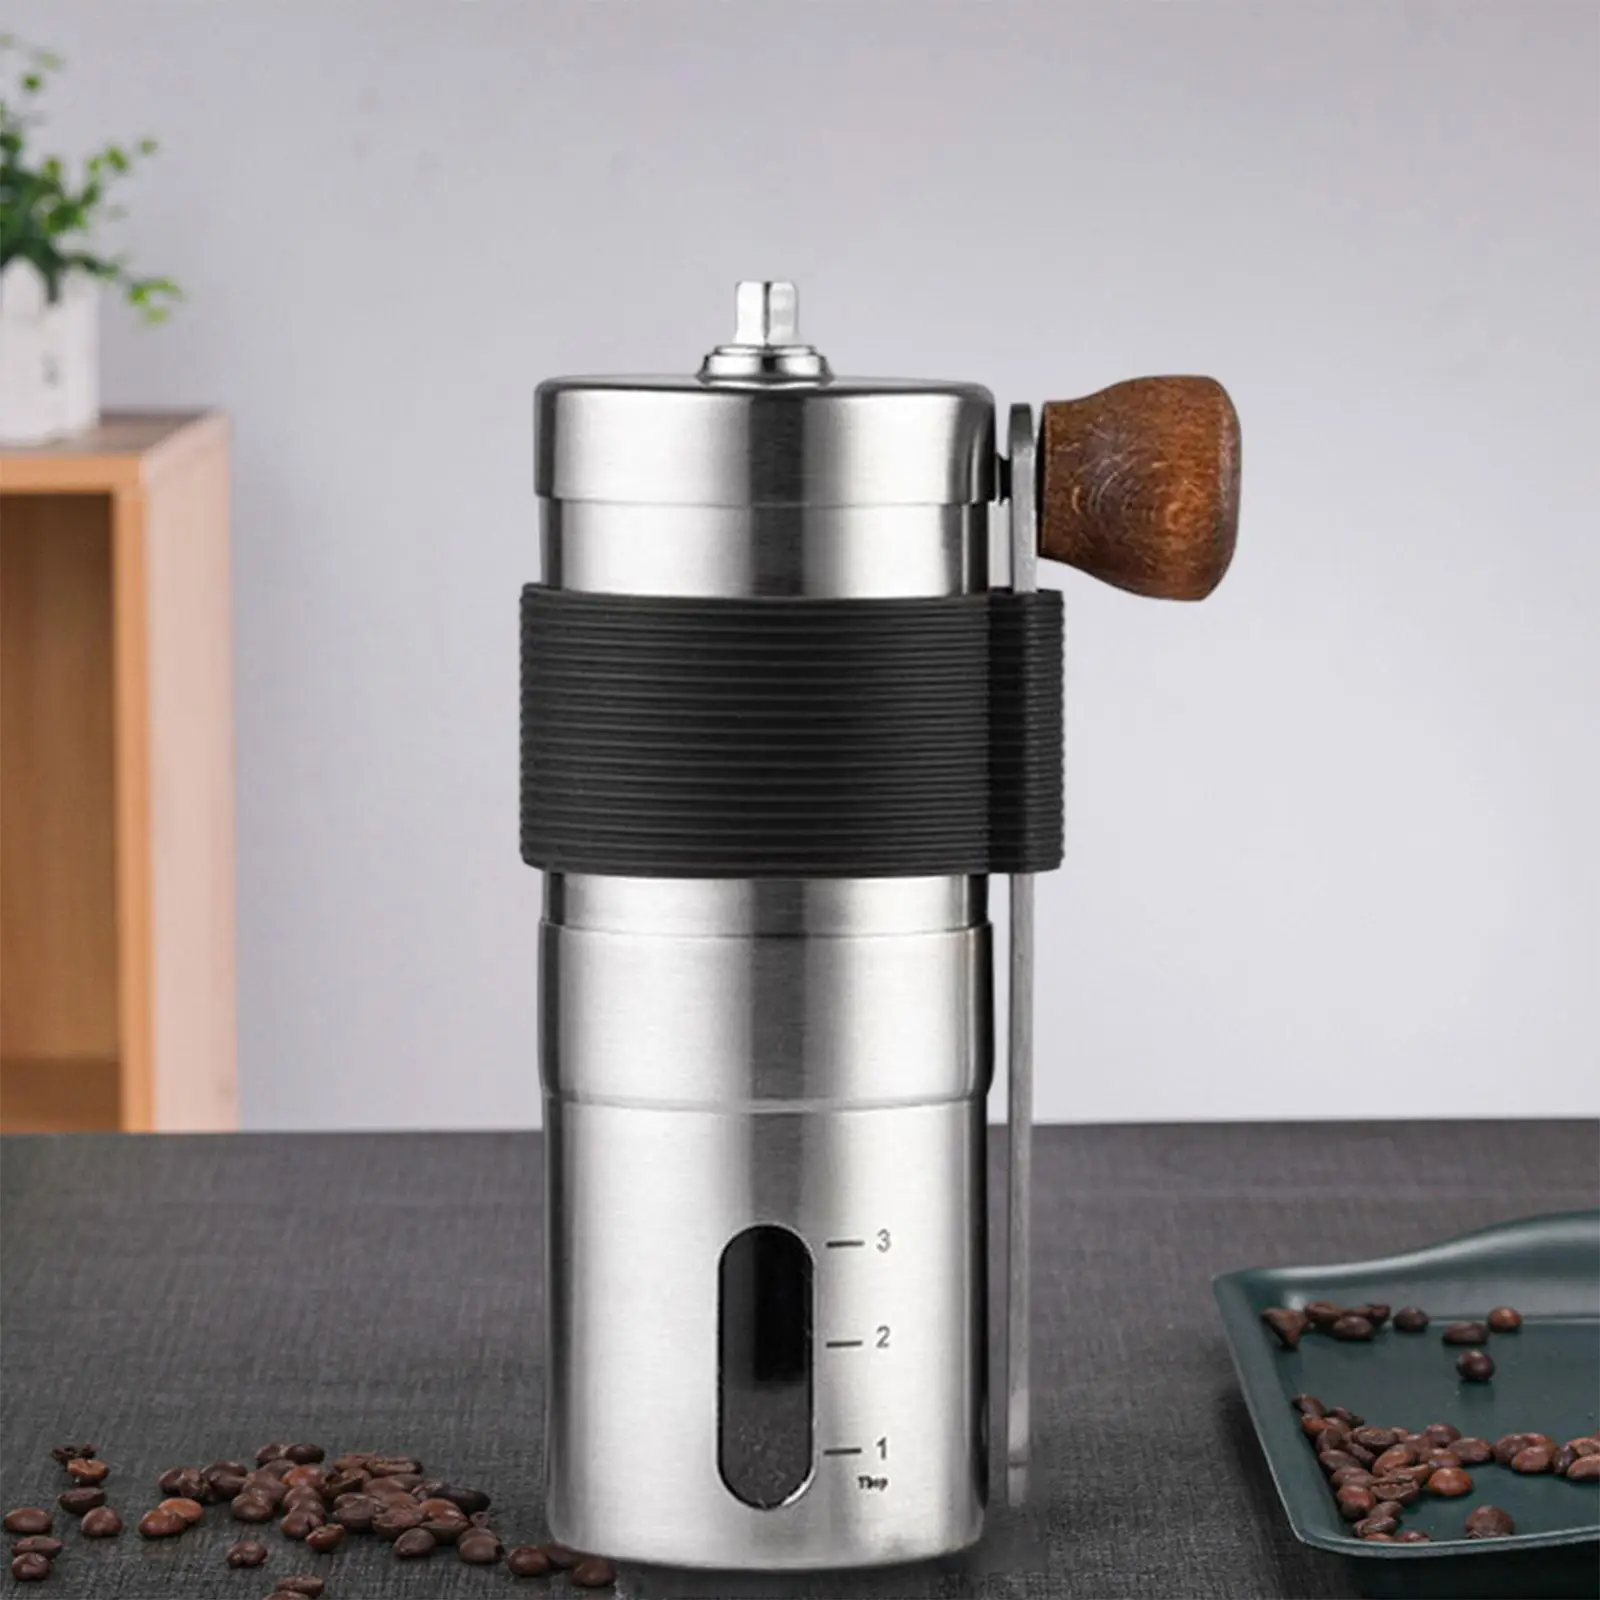 Manual Coffee Grinder Spice/Nuts Grinding Mill for Restaurant Picnic Office